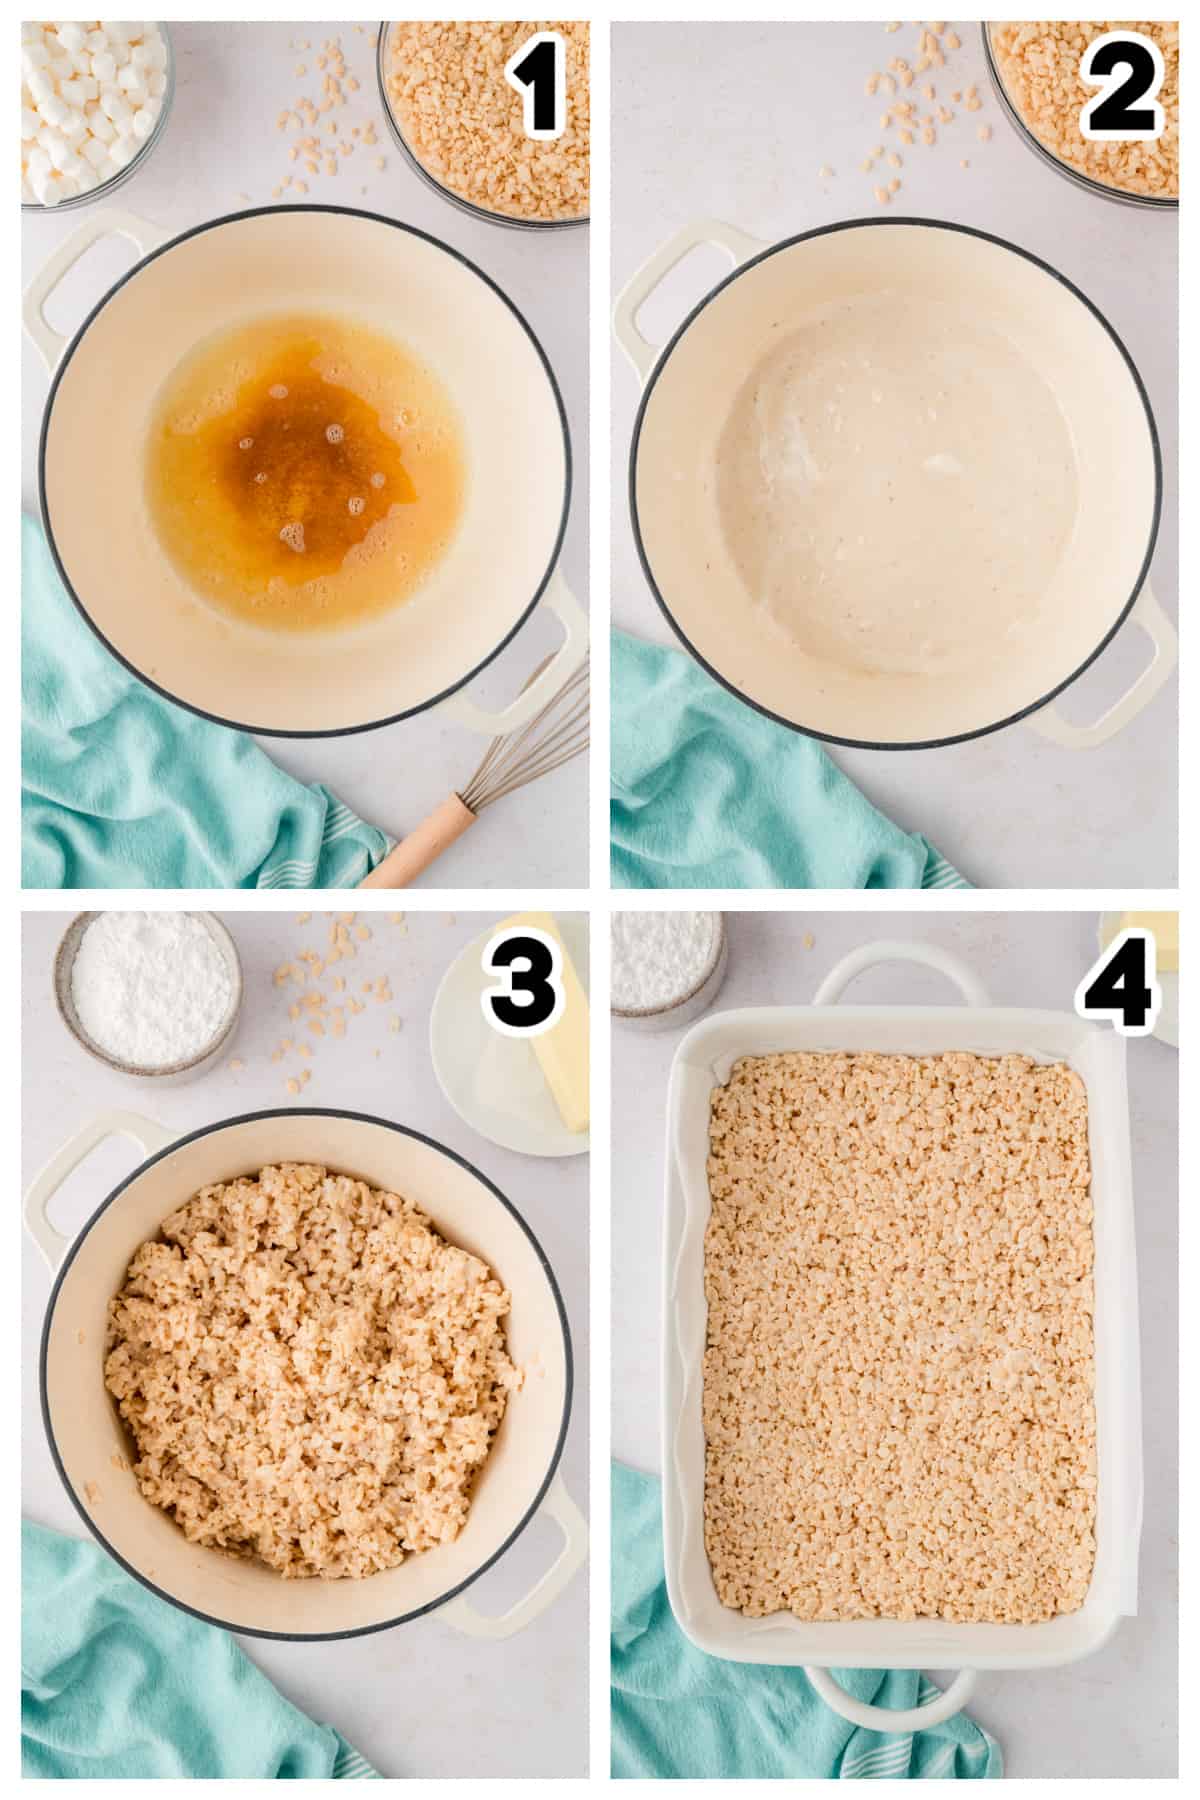 Collage showing how to make rice krispie treats.